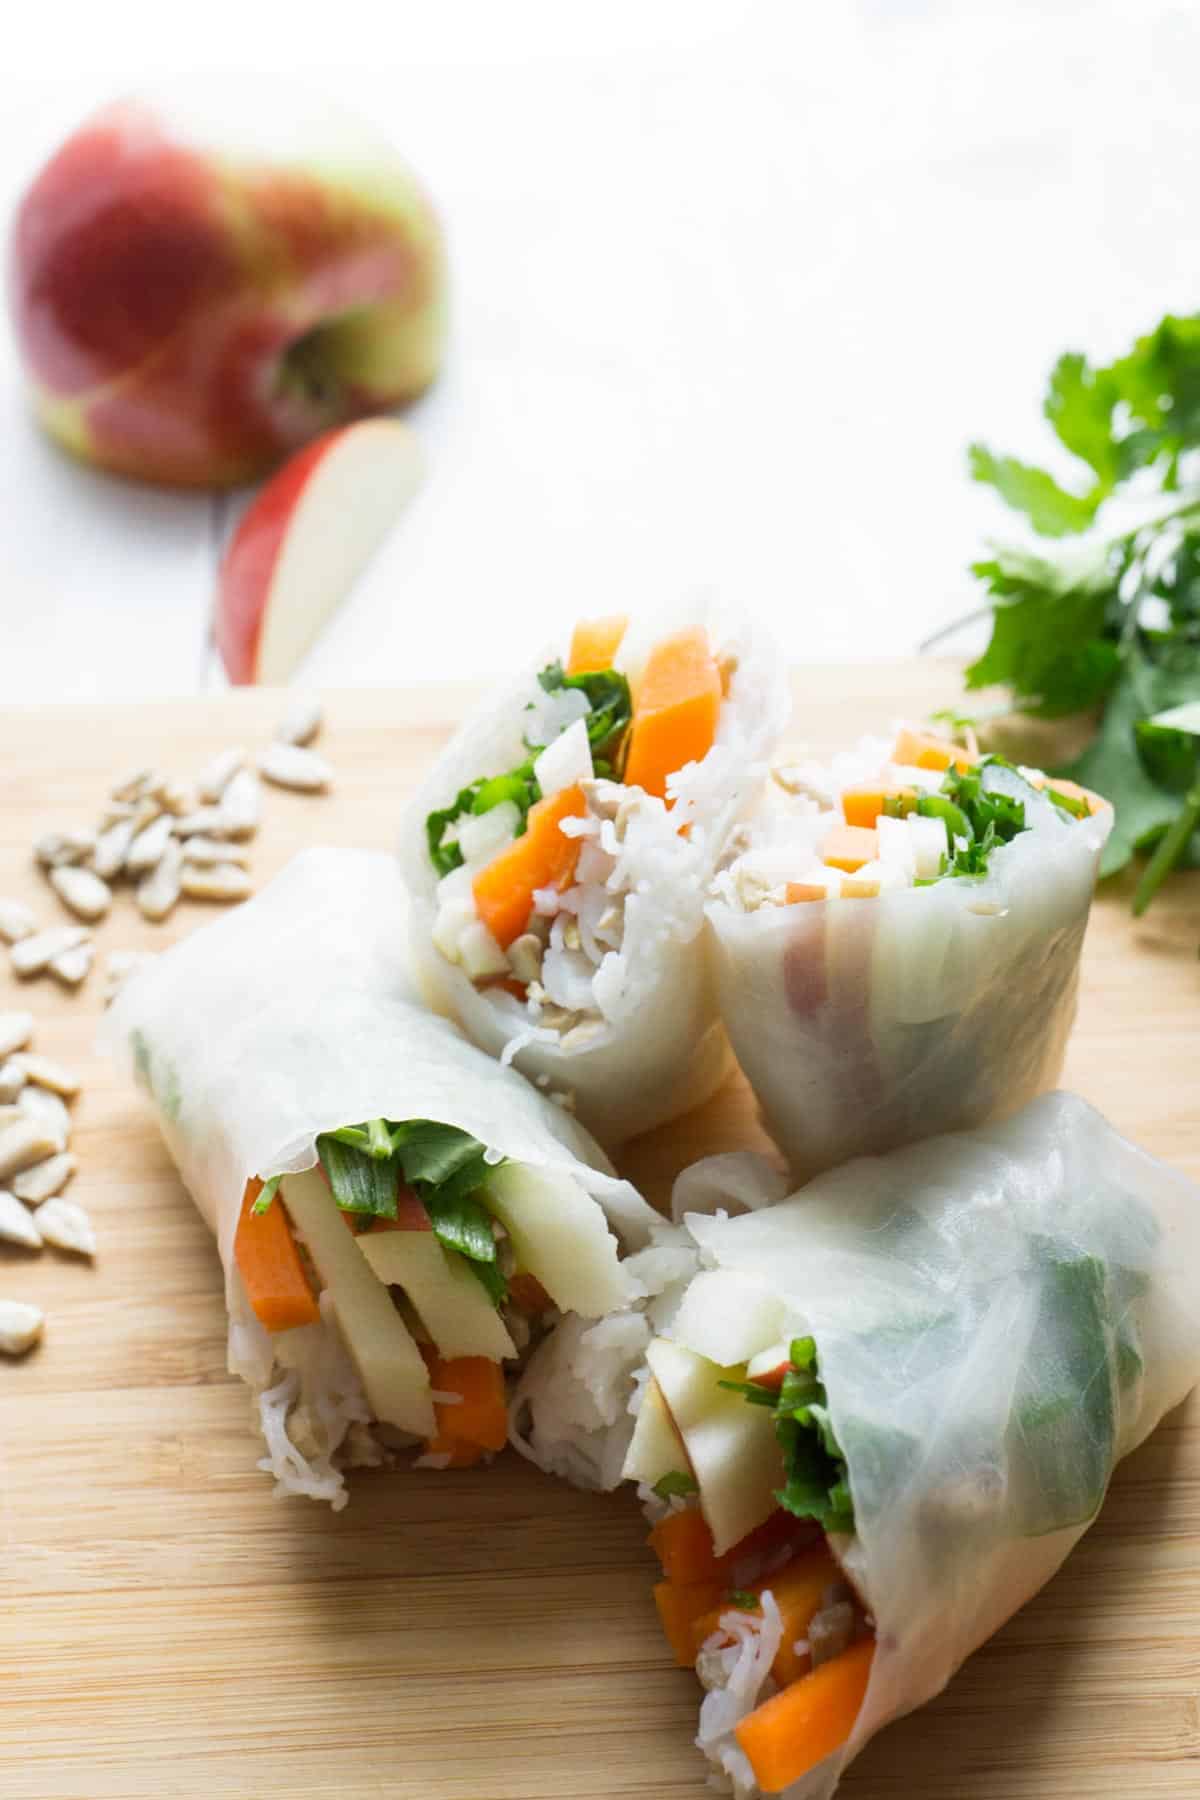 Salad Rolls with Walnut Sauce (16 of 23) - Smart Nutrition with Jessica ...